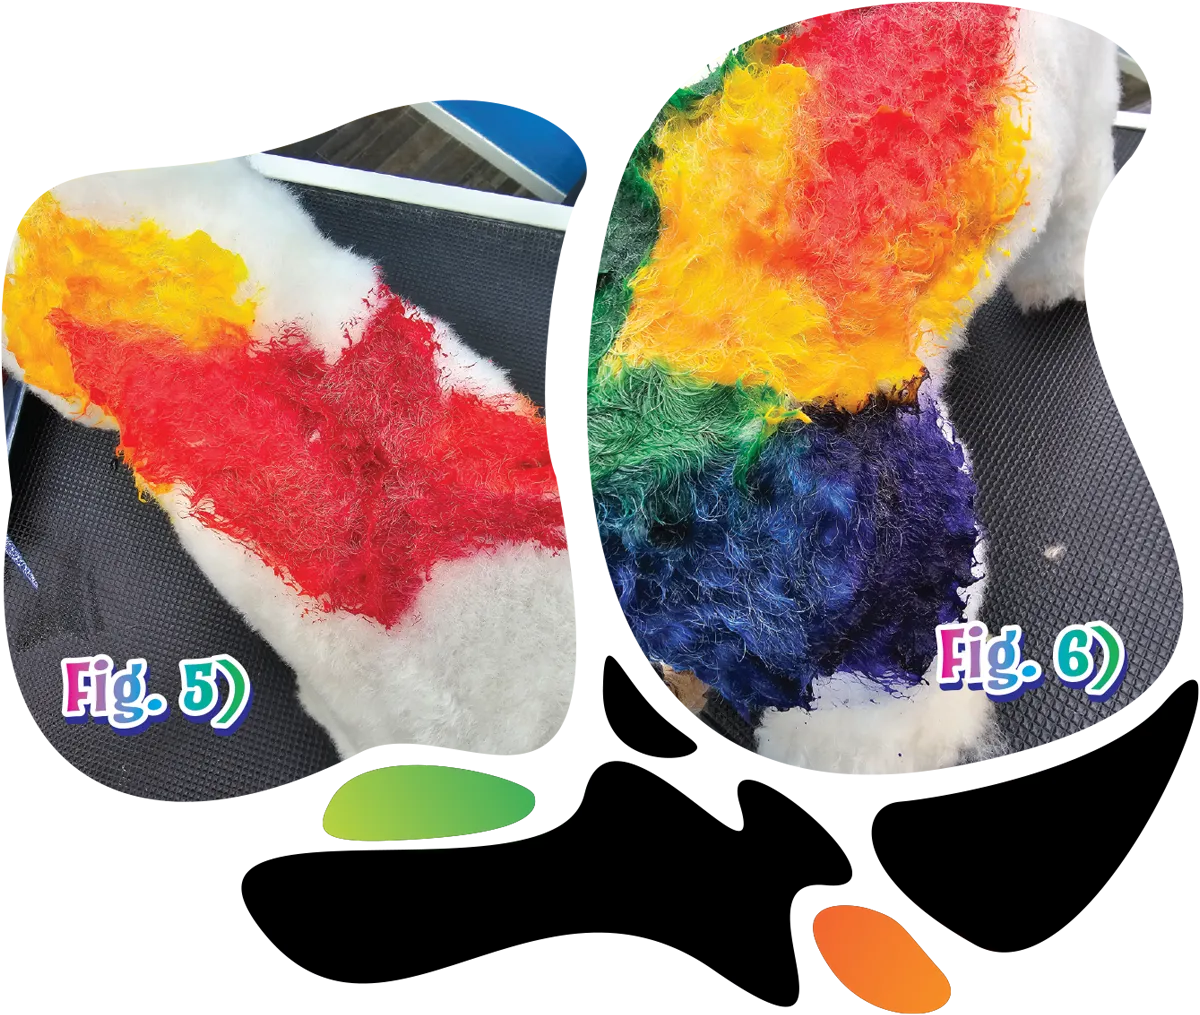 Figures 5 and 6 showing color application to various parts of the fur